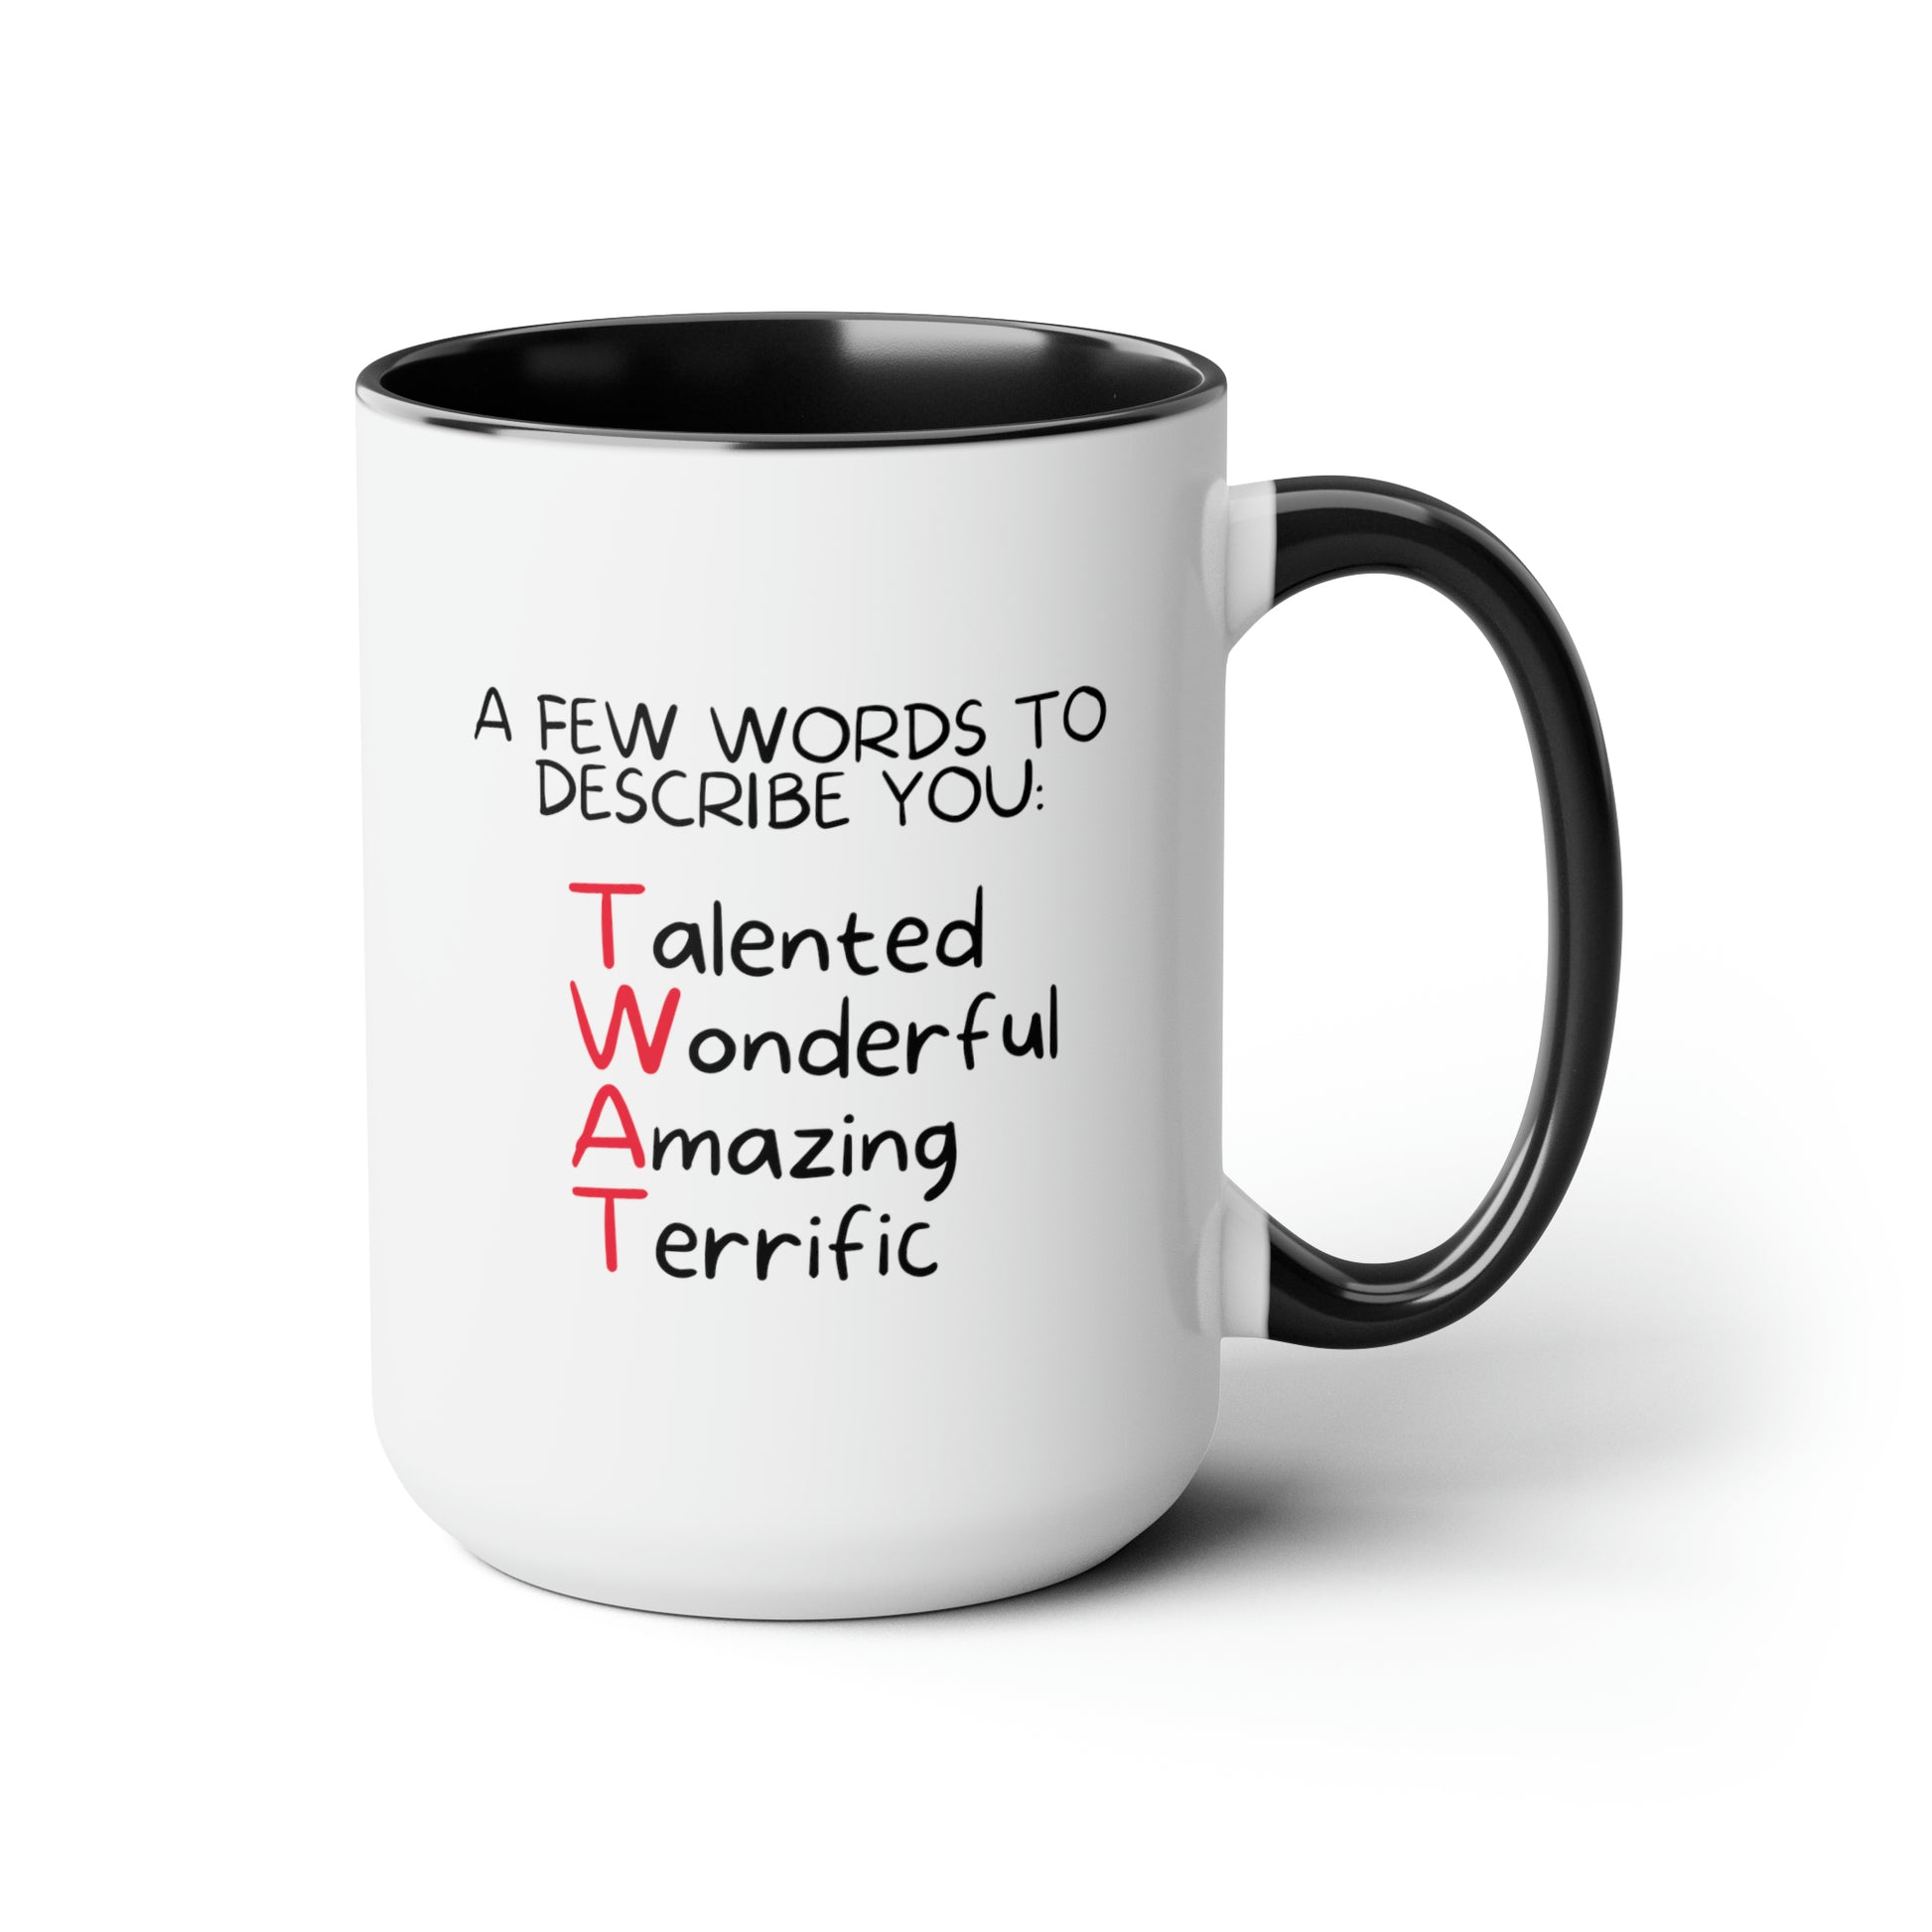 A Few Words To Describe You Talented Wonderful Amazing Terrific 15oz white with black accent funny large coffee mug gift for coworker sarcastic office rude boss work waveywares wavey wares wavywares wavy wares 